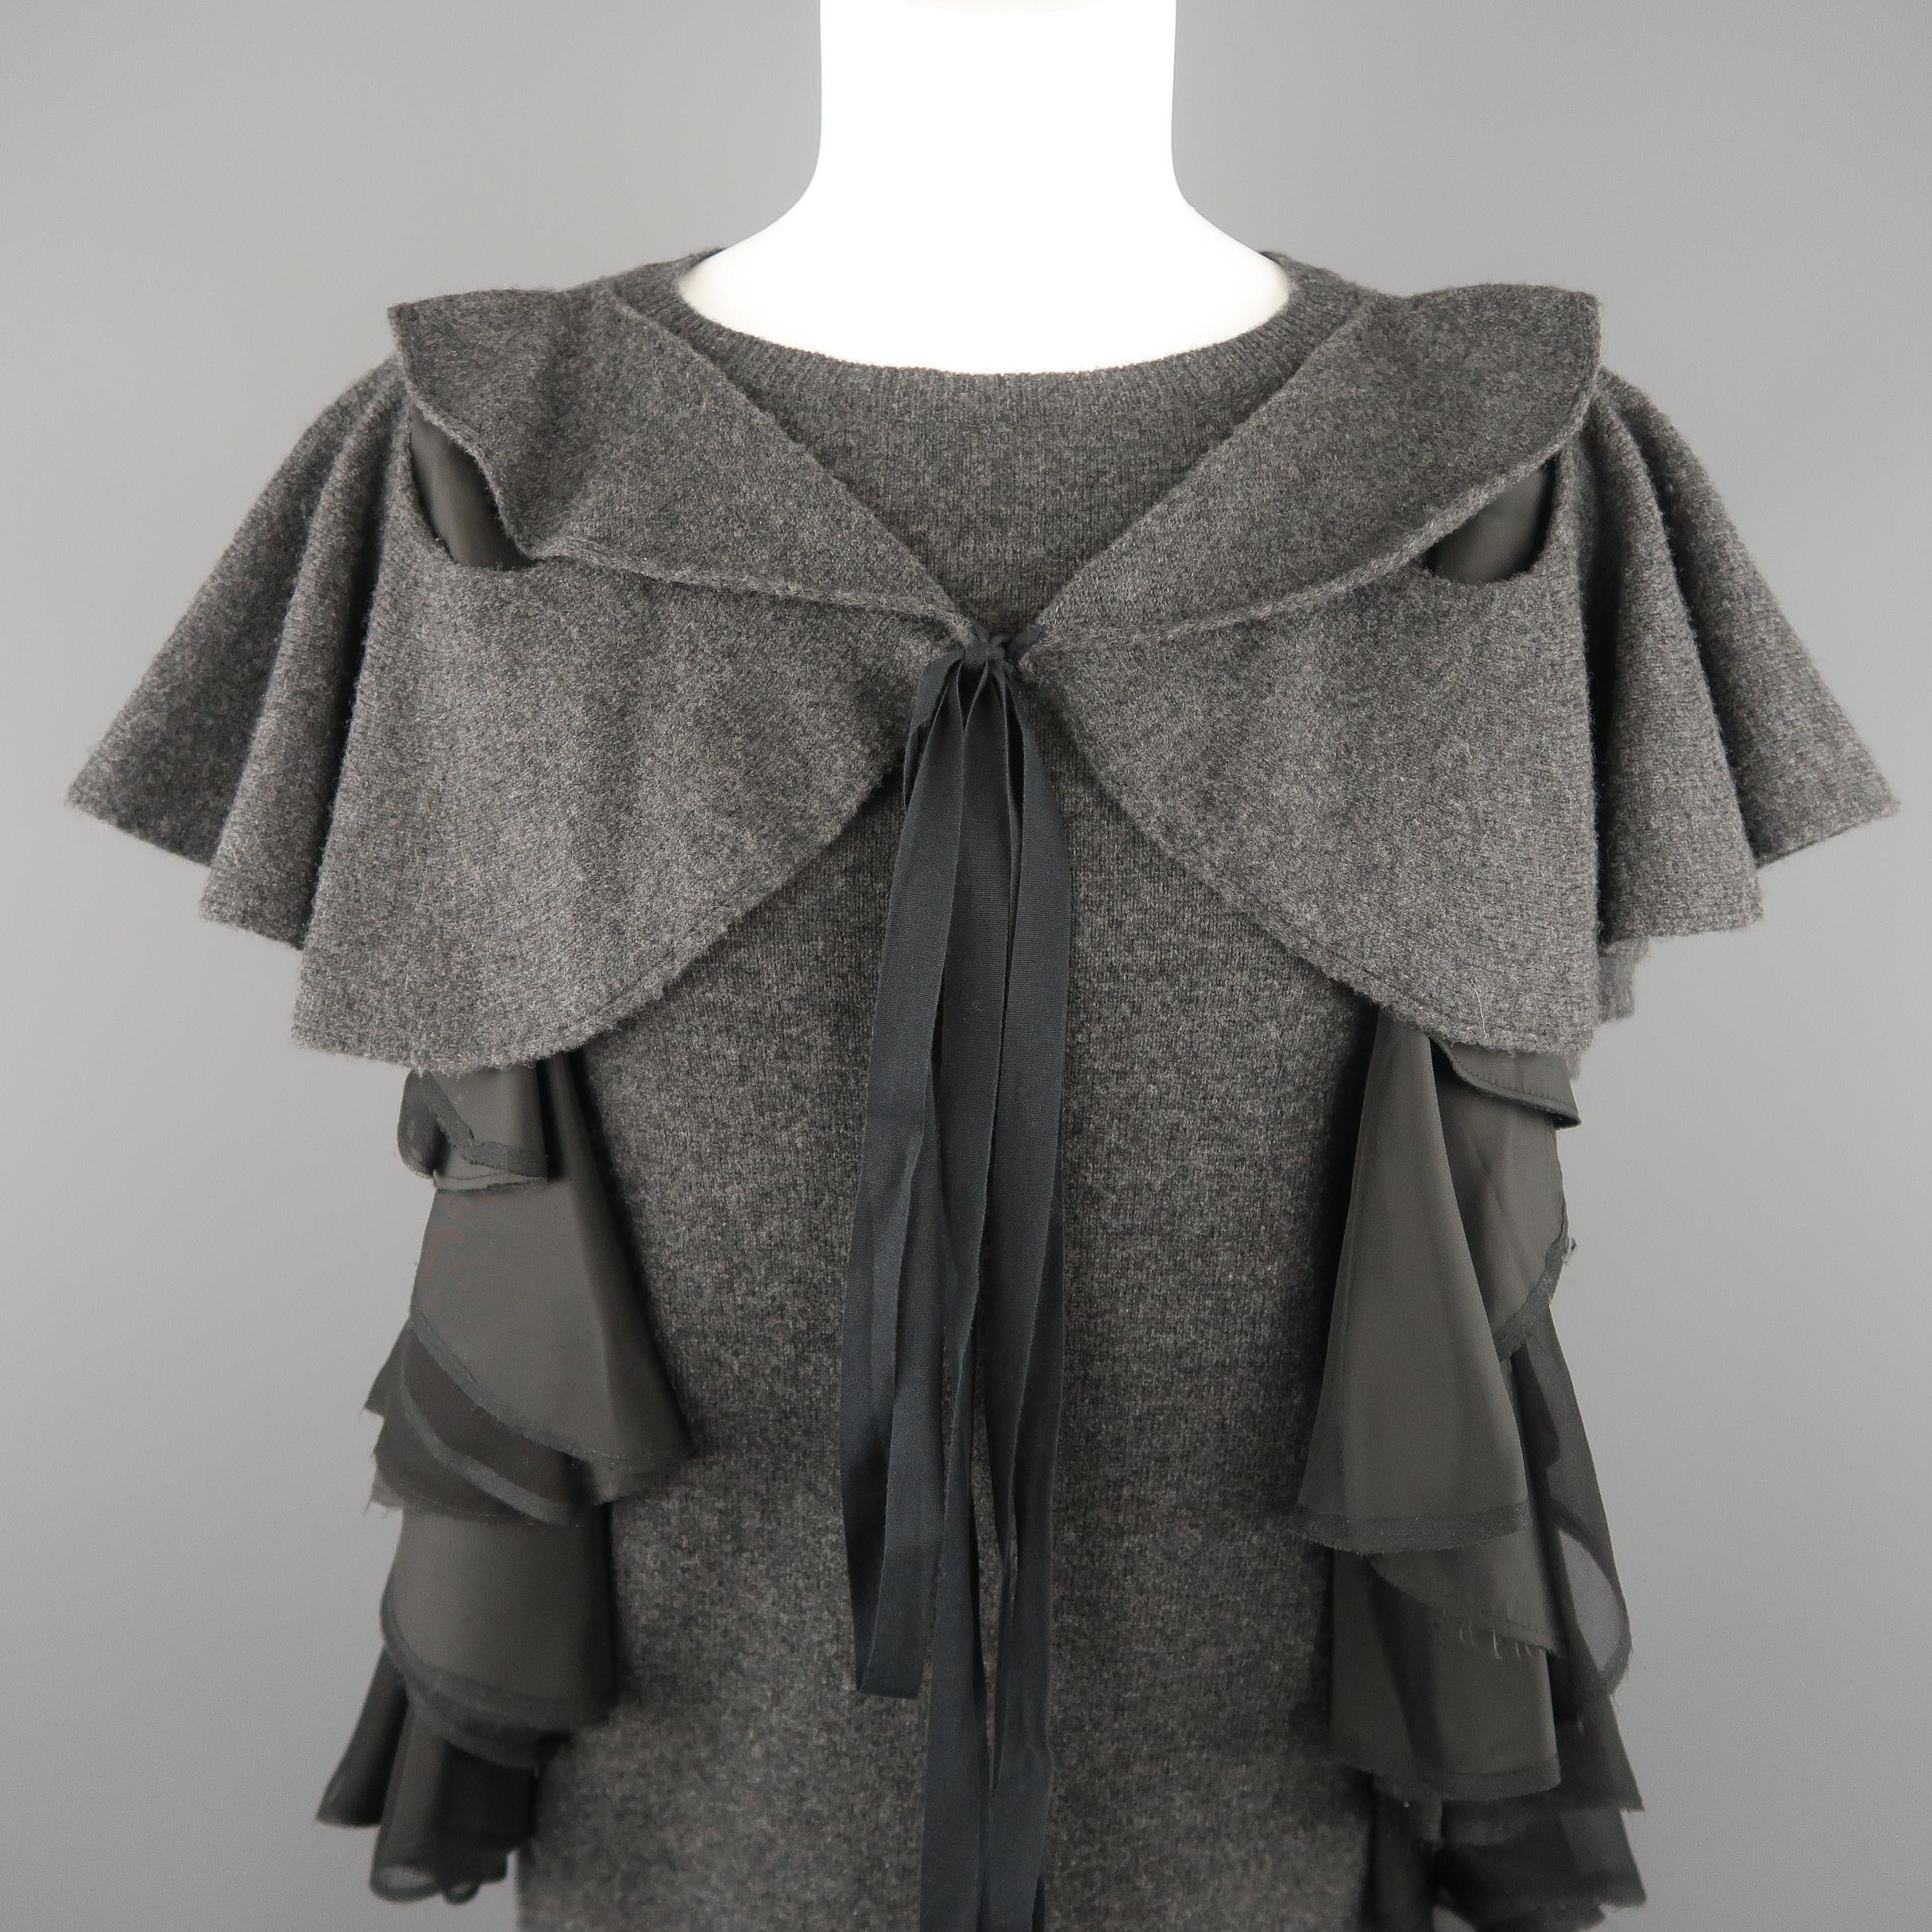 SACAI sweater shift sac dress comes in dark heather wool knit with a crewneck, ruffled sleave overlay that ties in front, and silk chiffon and satin ruffled side accents. Made in Japan.
 
Excellent Pre-Owned Condition.
Marked: JP 2
 
Measurements:
